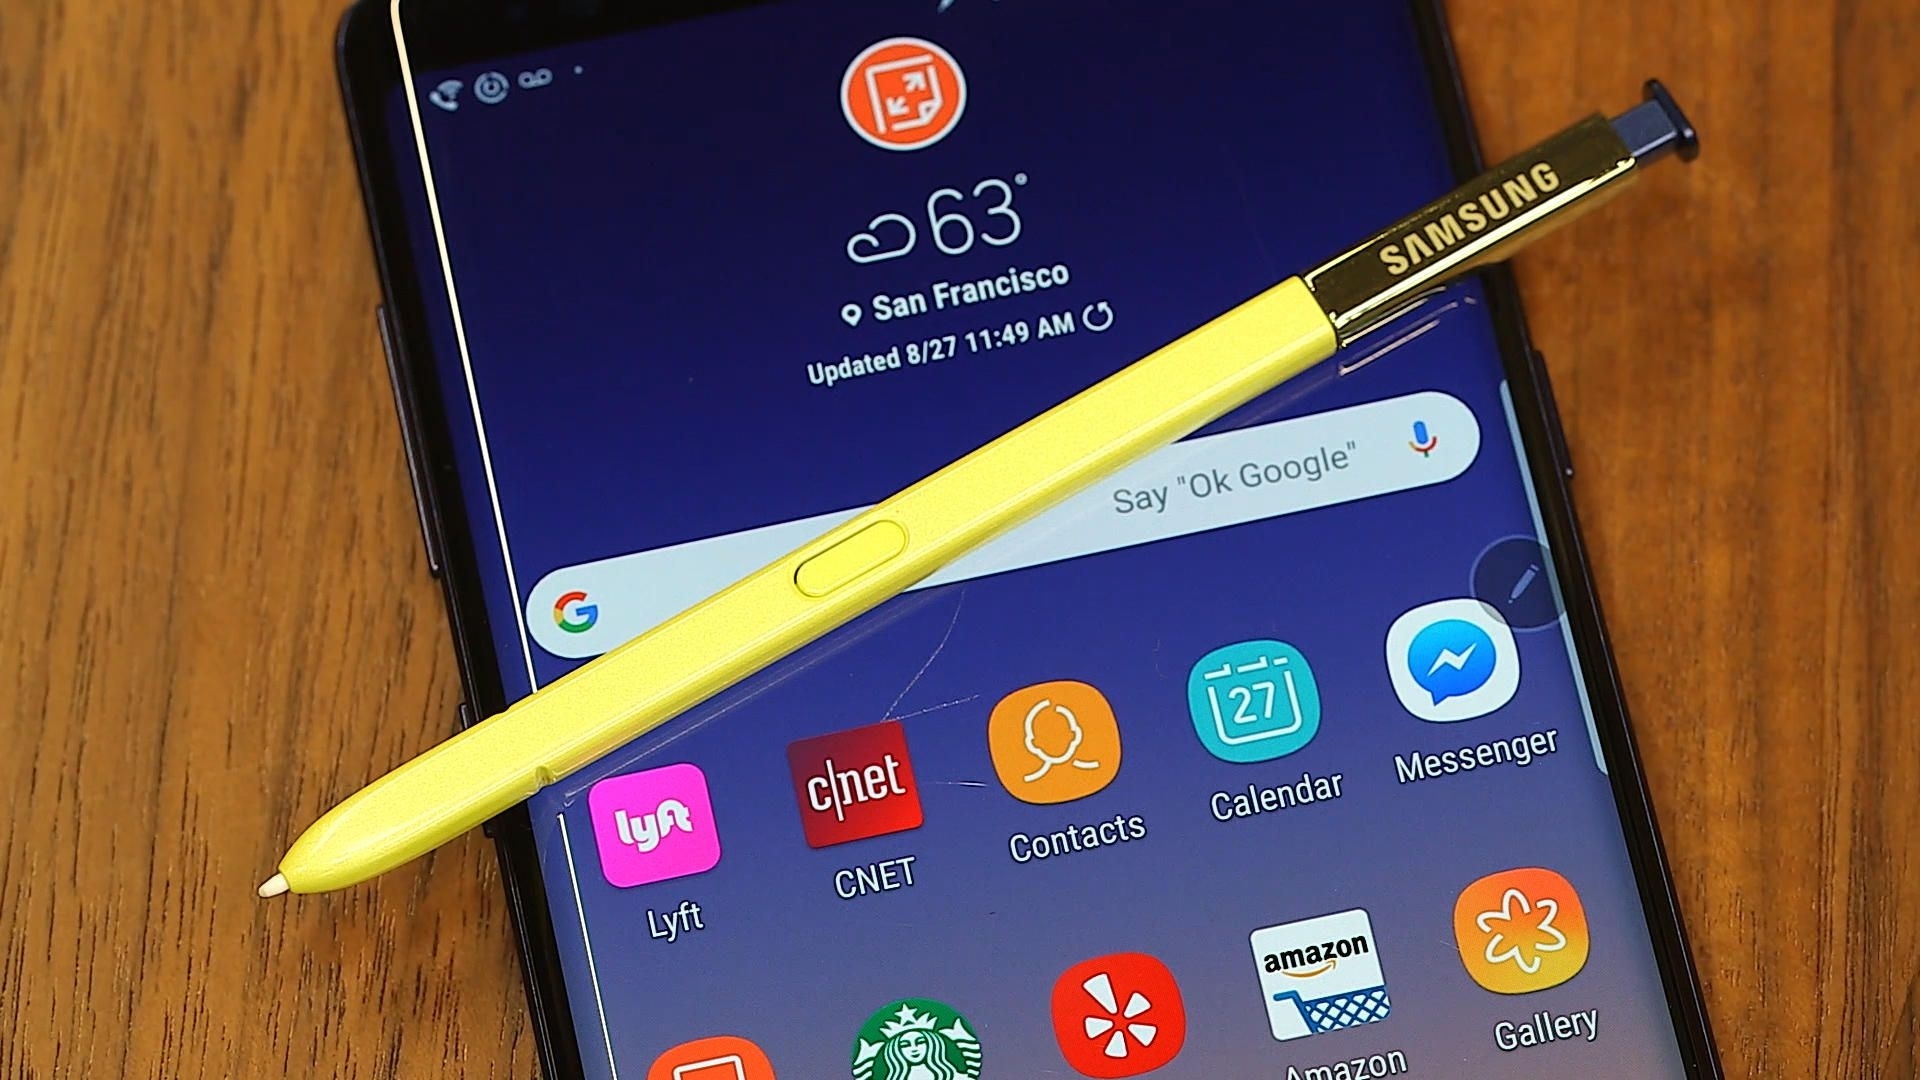 6 Best Galaxy Note 9 Tips And Tricks - Video - Cnet Samsung Galaxy Note 3 Calendar Holidays